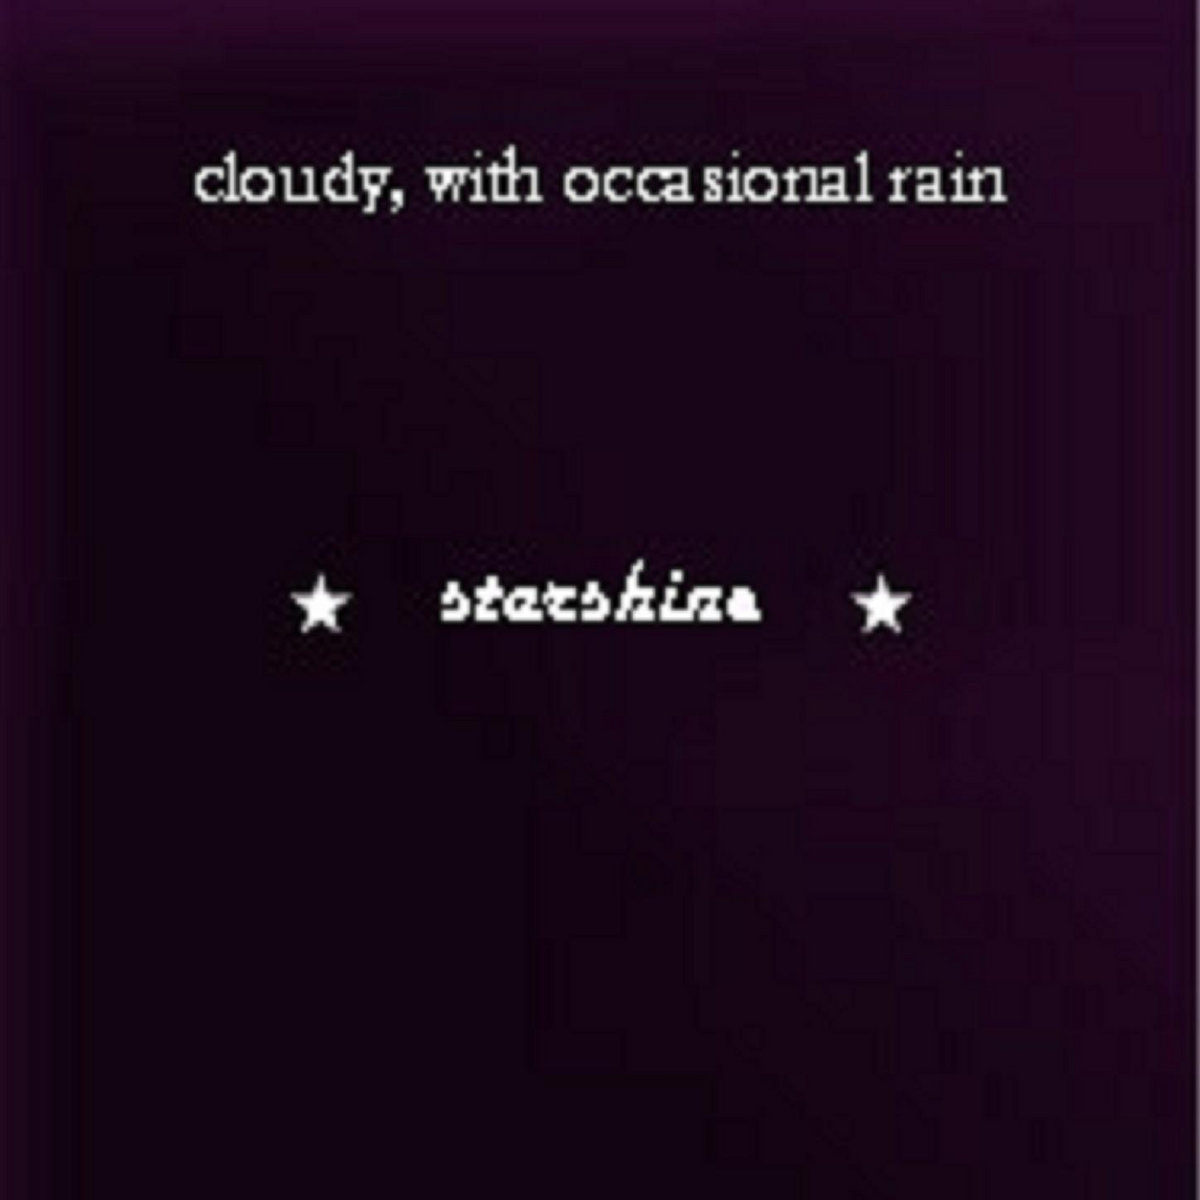 cloudy, with occasional rain - starshine album cover